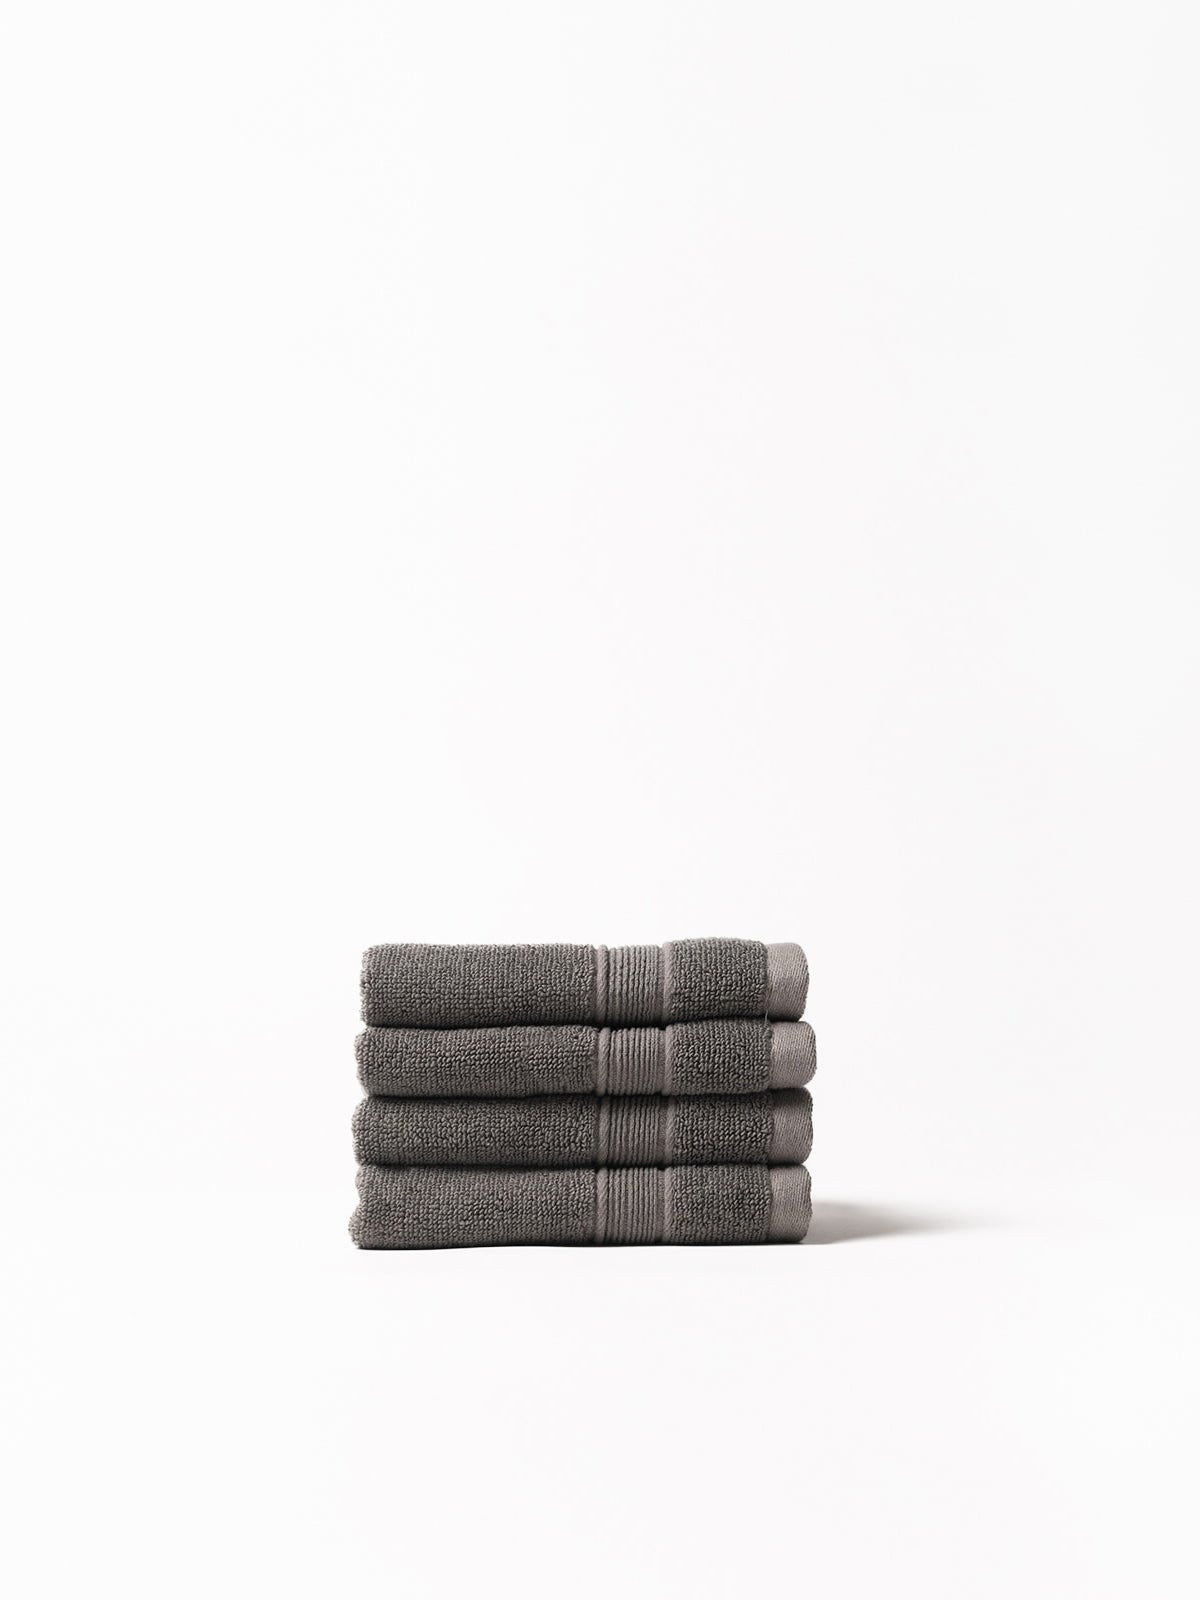 Charcoal washcloths folded with white background |Color:Charcoal